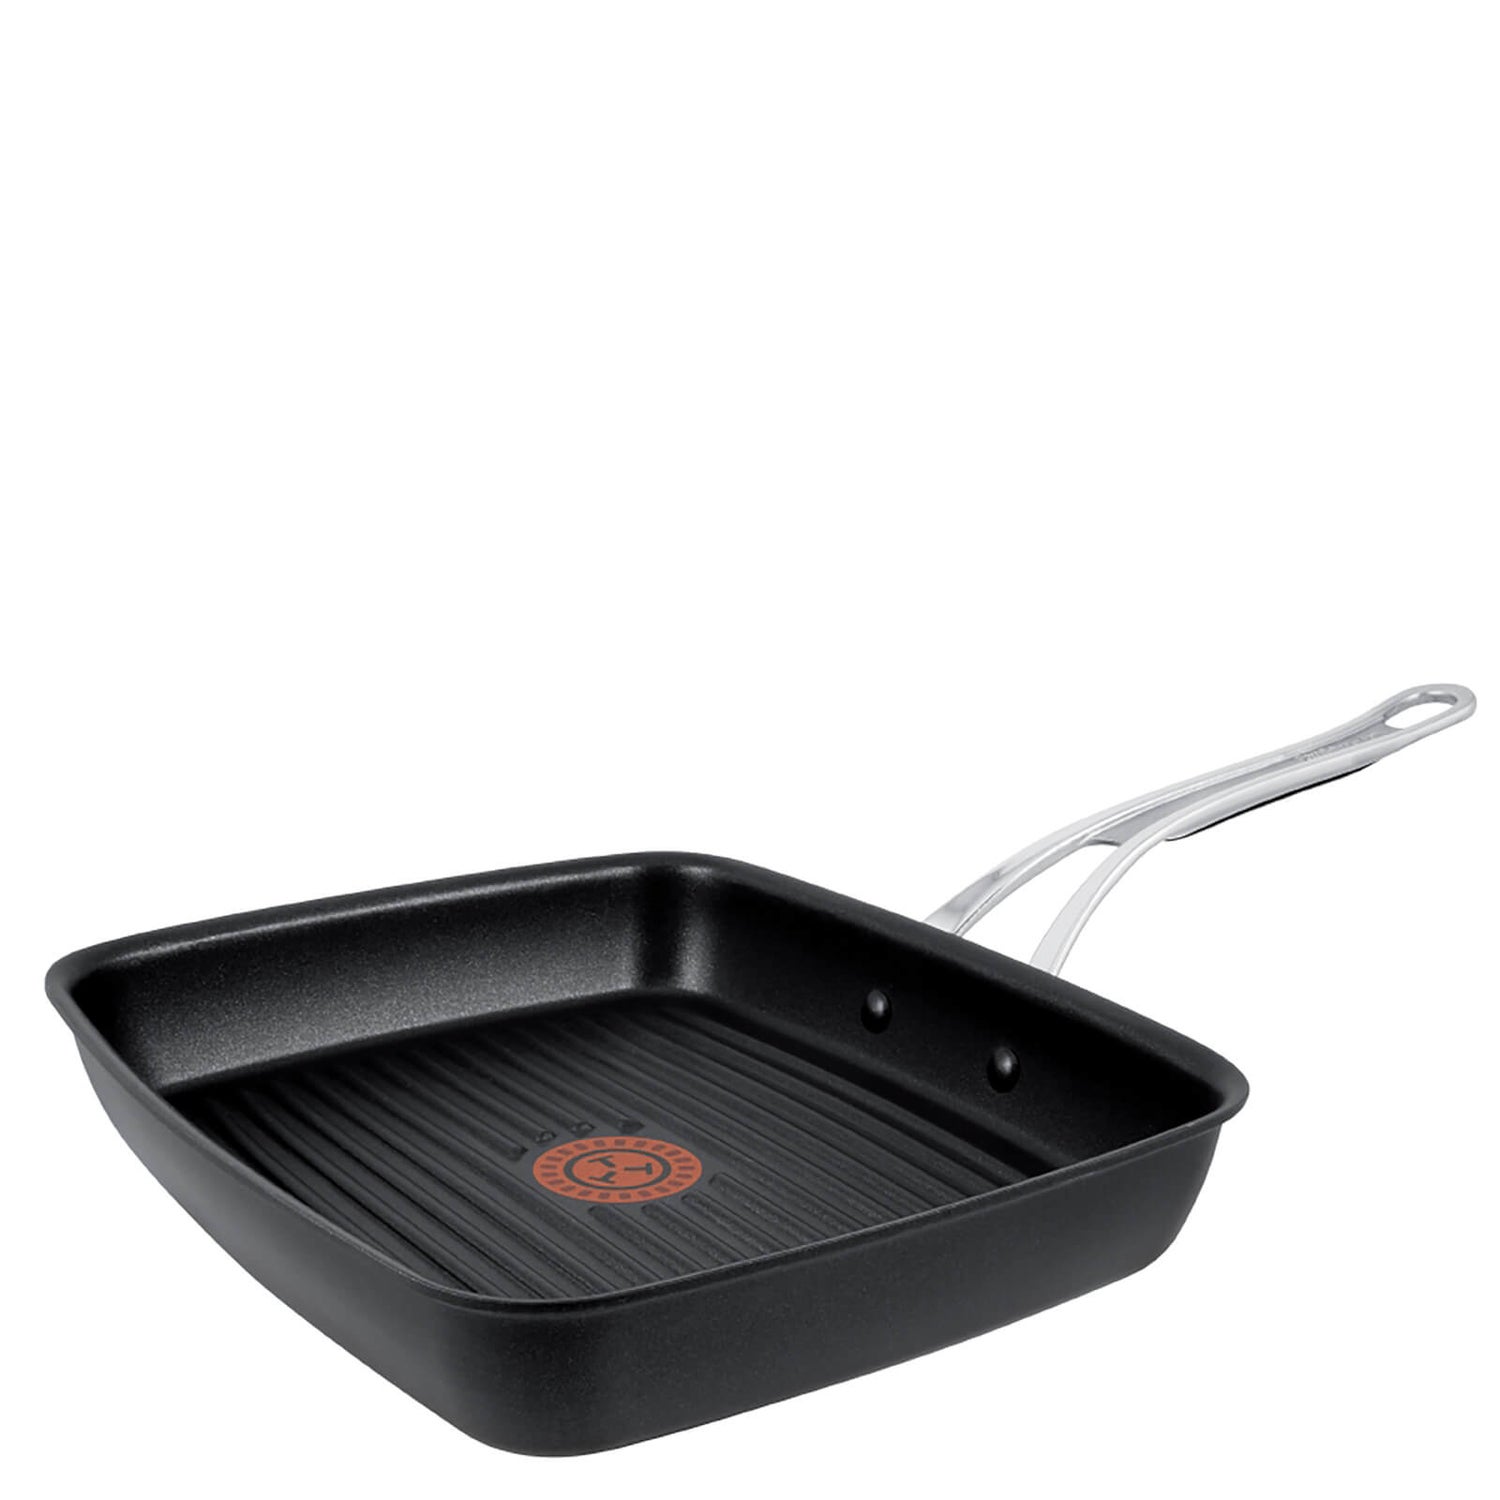 Jamie Oliver by Tefal E2114174 Hard Anodised Non-Stick Grill Pan - 23 x 27cm - Zavvi US